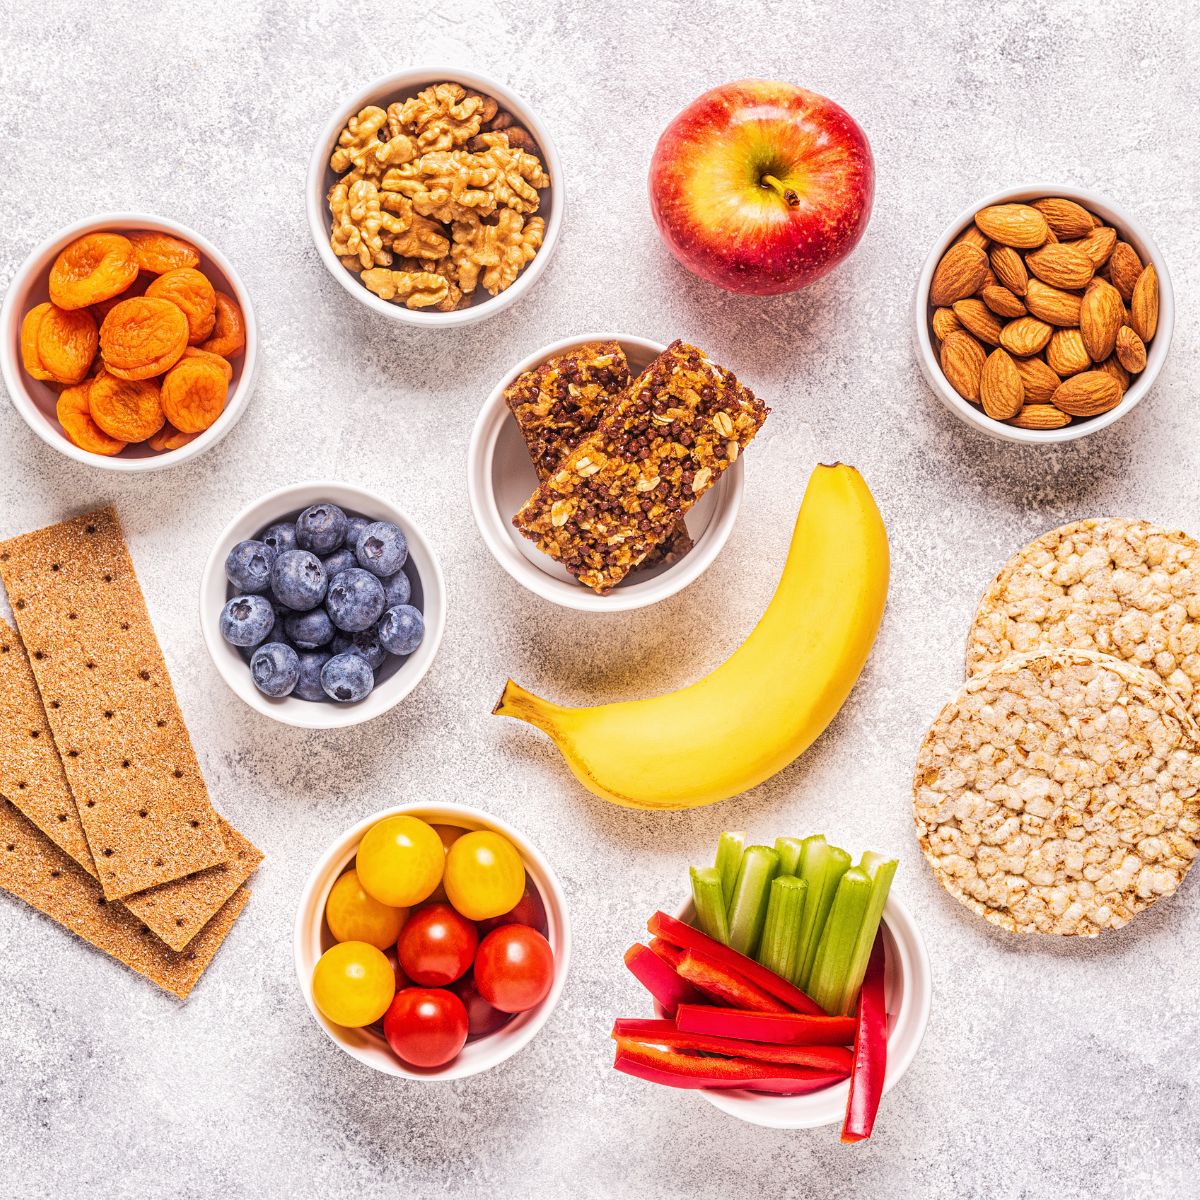 a display of healthy snacks: nuts, almonds, dried fruit, fresh fruits and vegetables, and crackers.